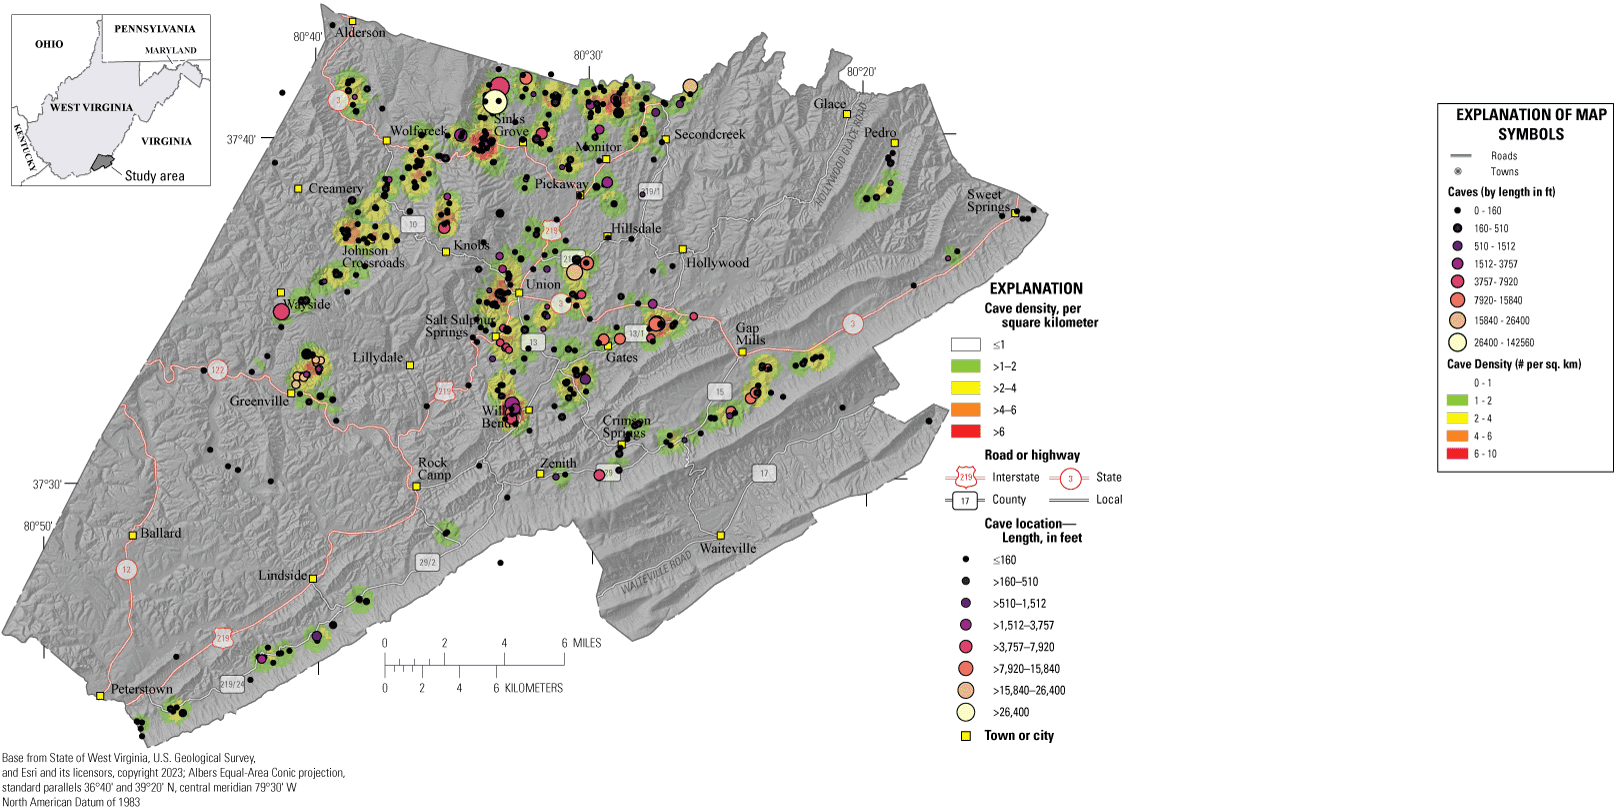 Cave distribution and density is highest in the north central part of the county